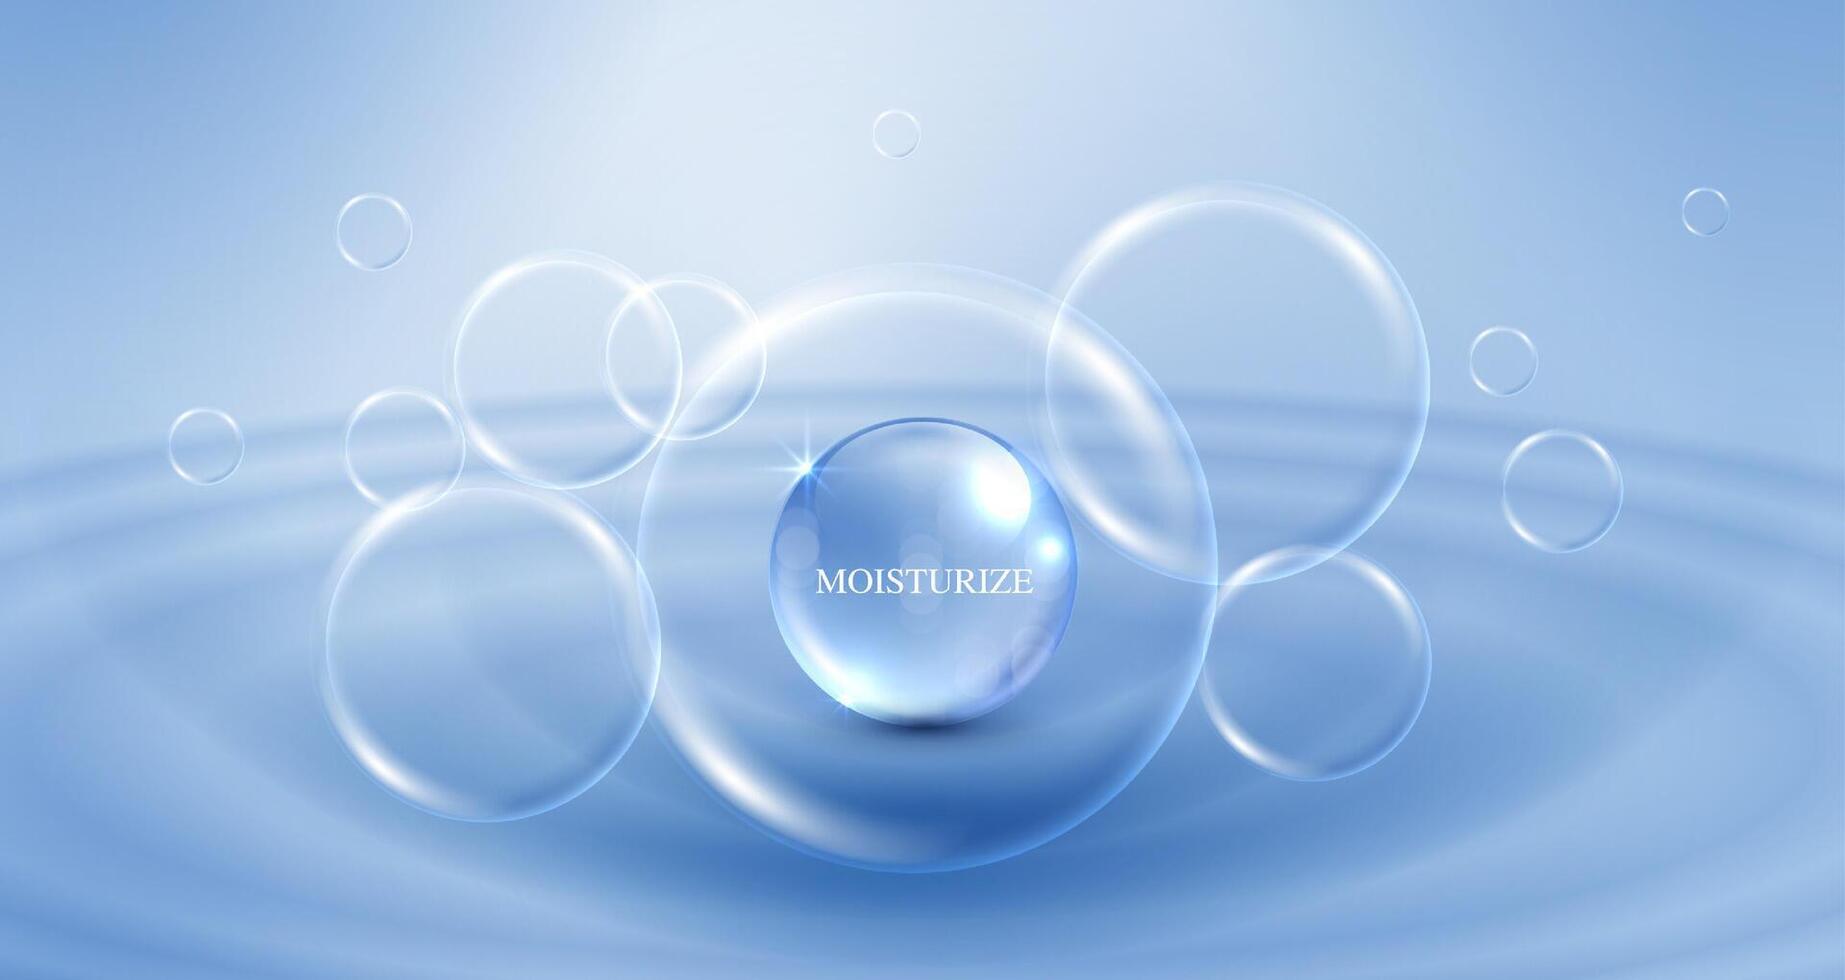 Moisturizer and hyaluronic acid on a blue background. skin care with water droplets is absorbed into the skin and cells. use ads, lotions, serums, creams. medical and scientific concepts. . vector